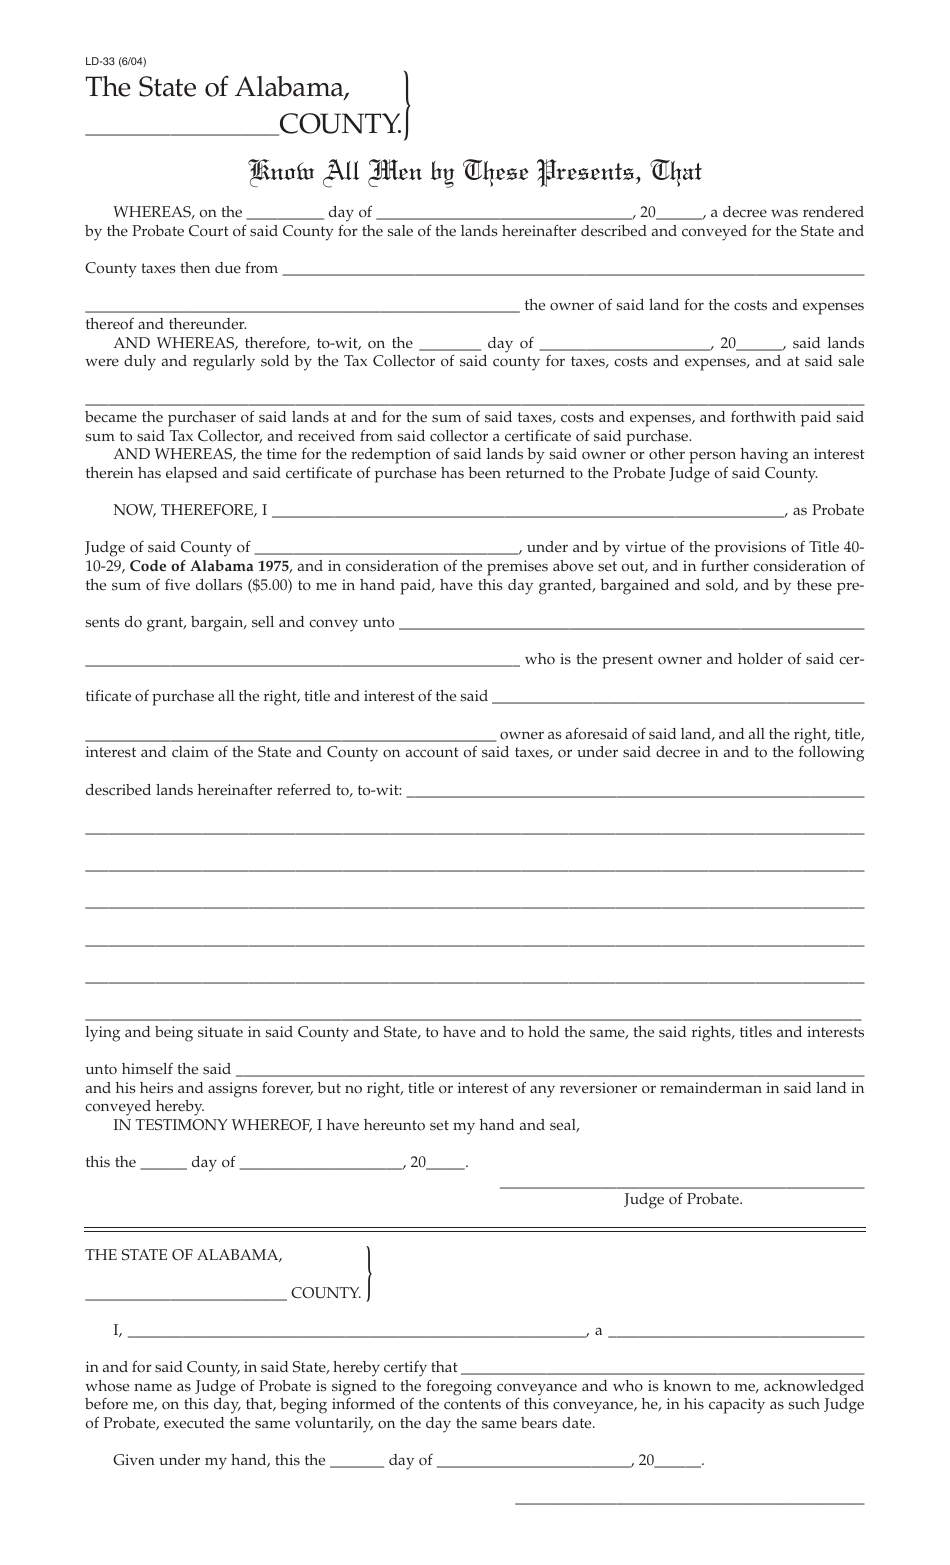 Form ADV: LD-33 Tax Deed Issued by County, for County Use Only - Alabama, Page 1